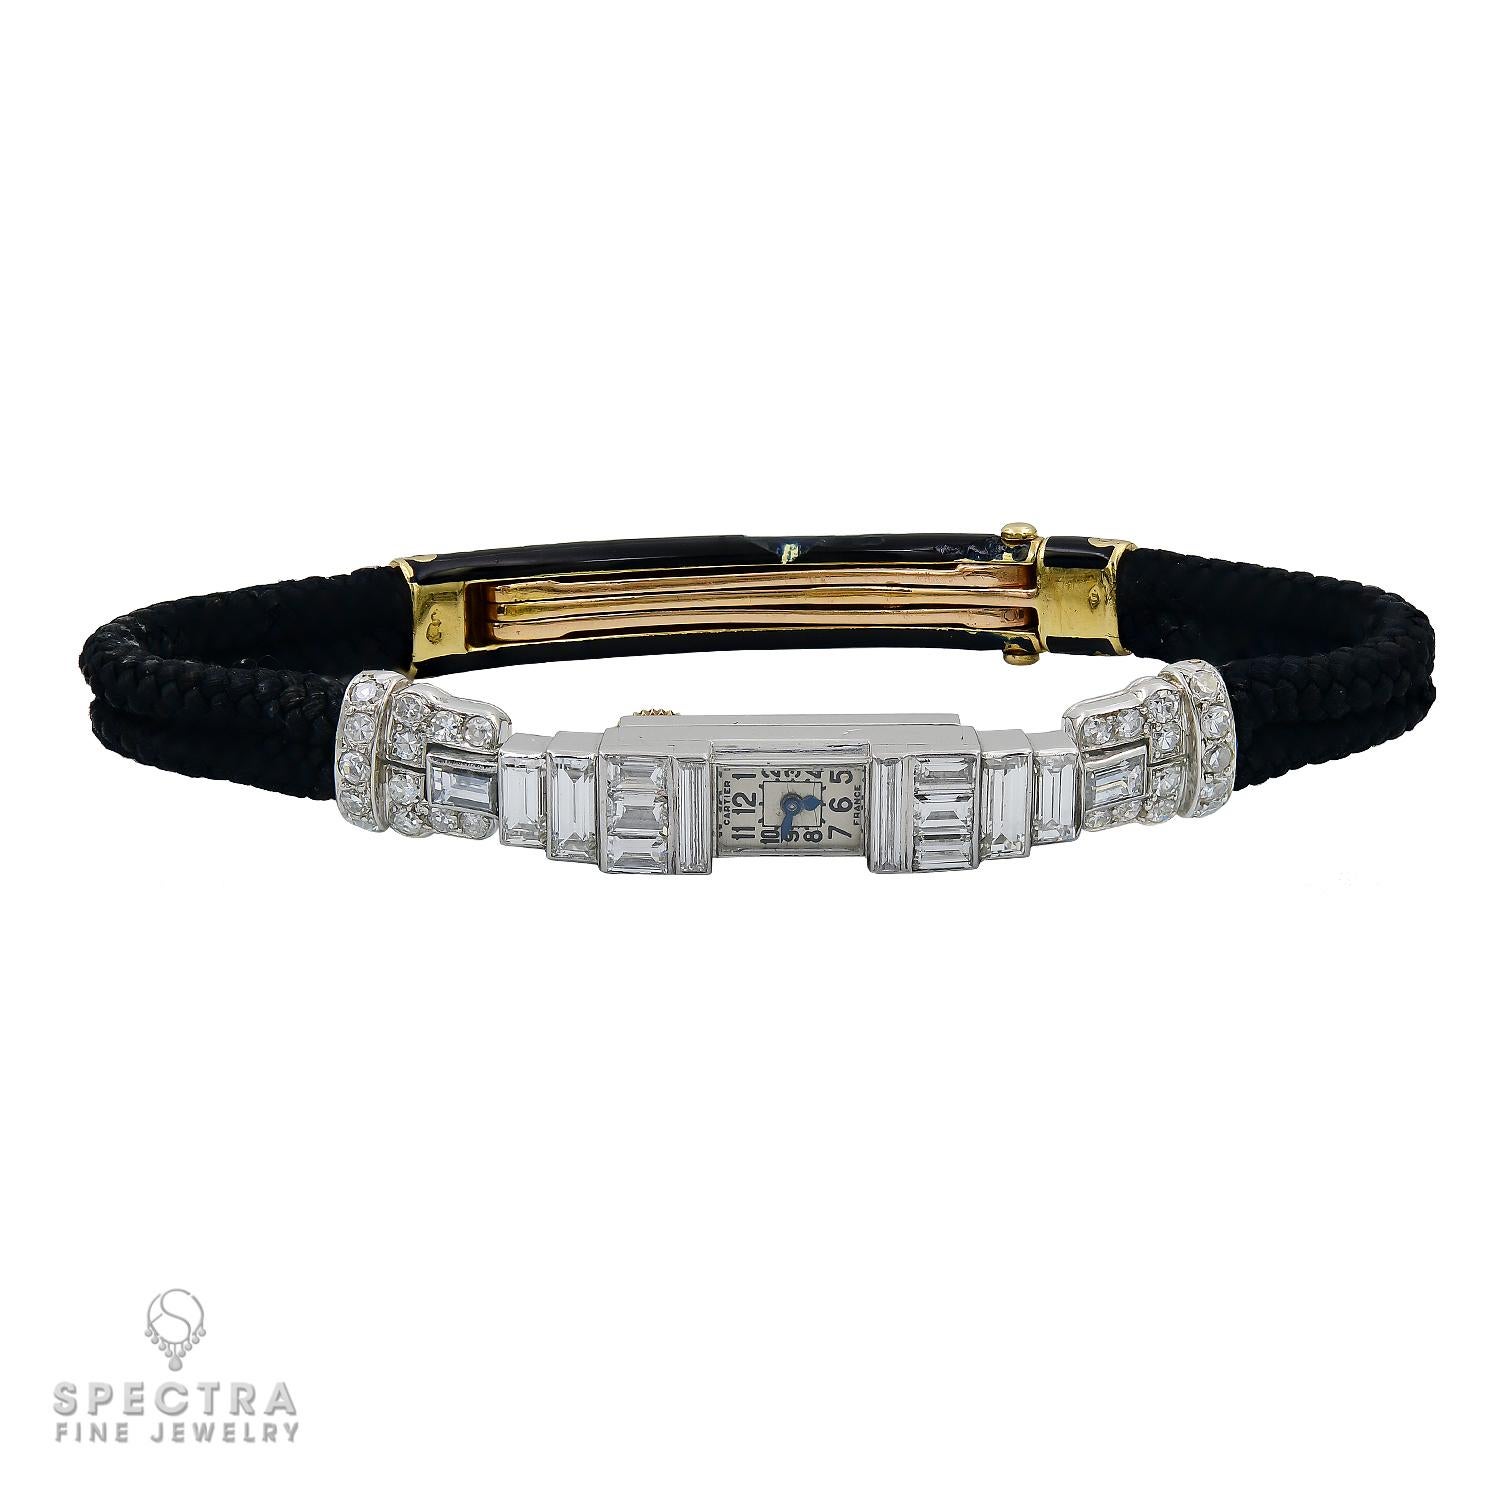 Cartier's Art Deco Diamond Wristwatch reflects the iconic Art Deco style, characterized by its geometric shapes, streamlined forms, and luxurious materials. Crafted with meticulous attention to detail, this stunning wristwatch showcases a blend of